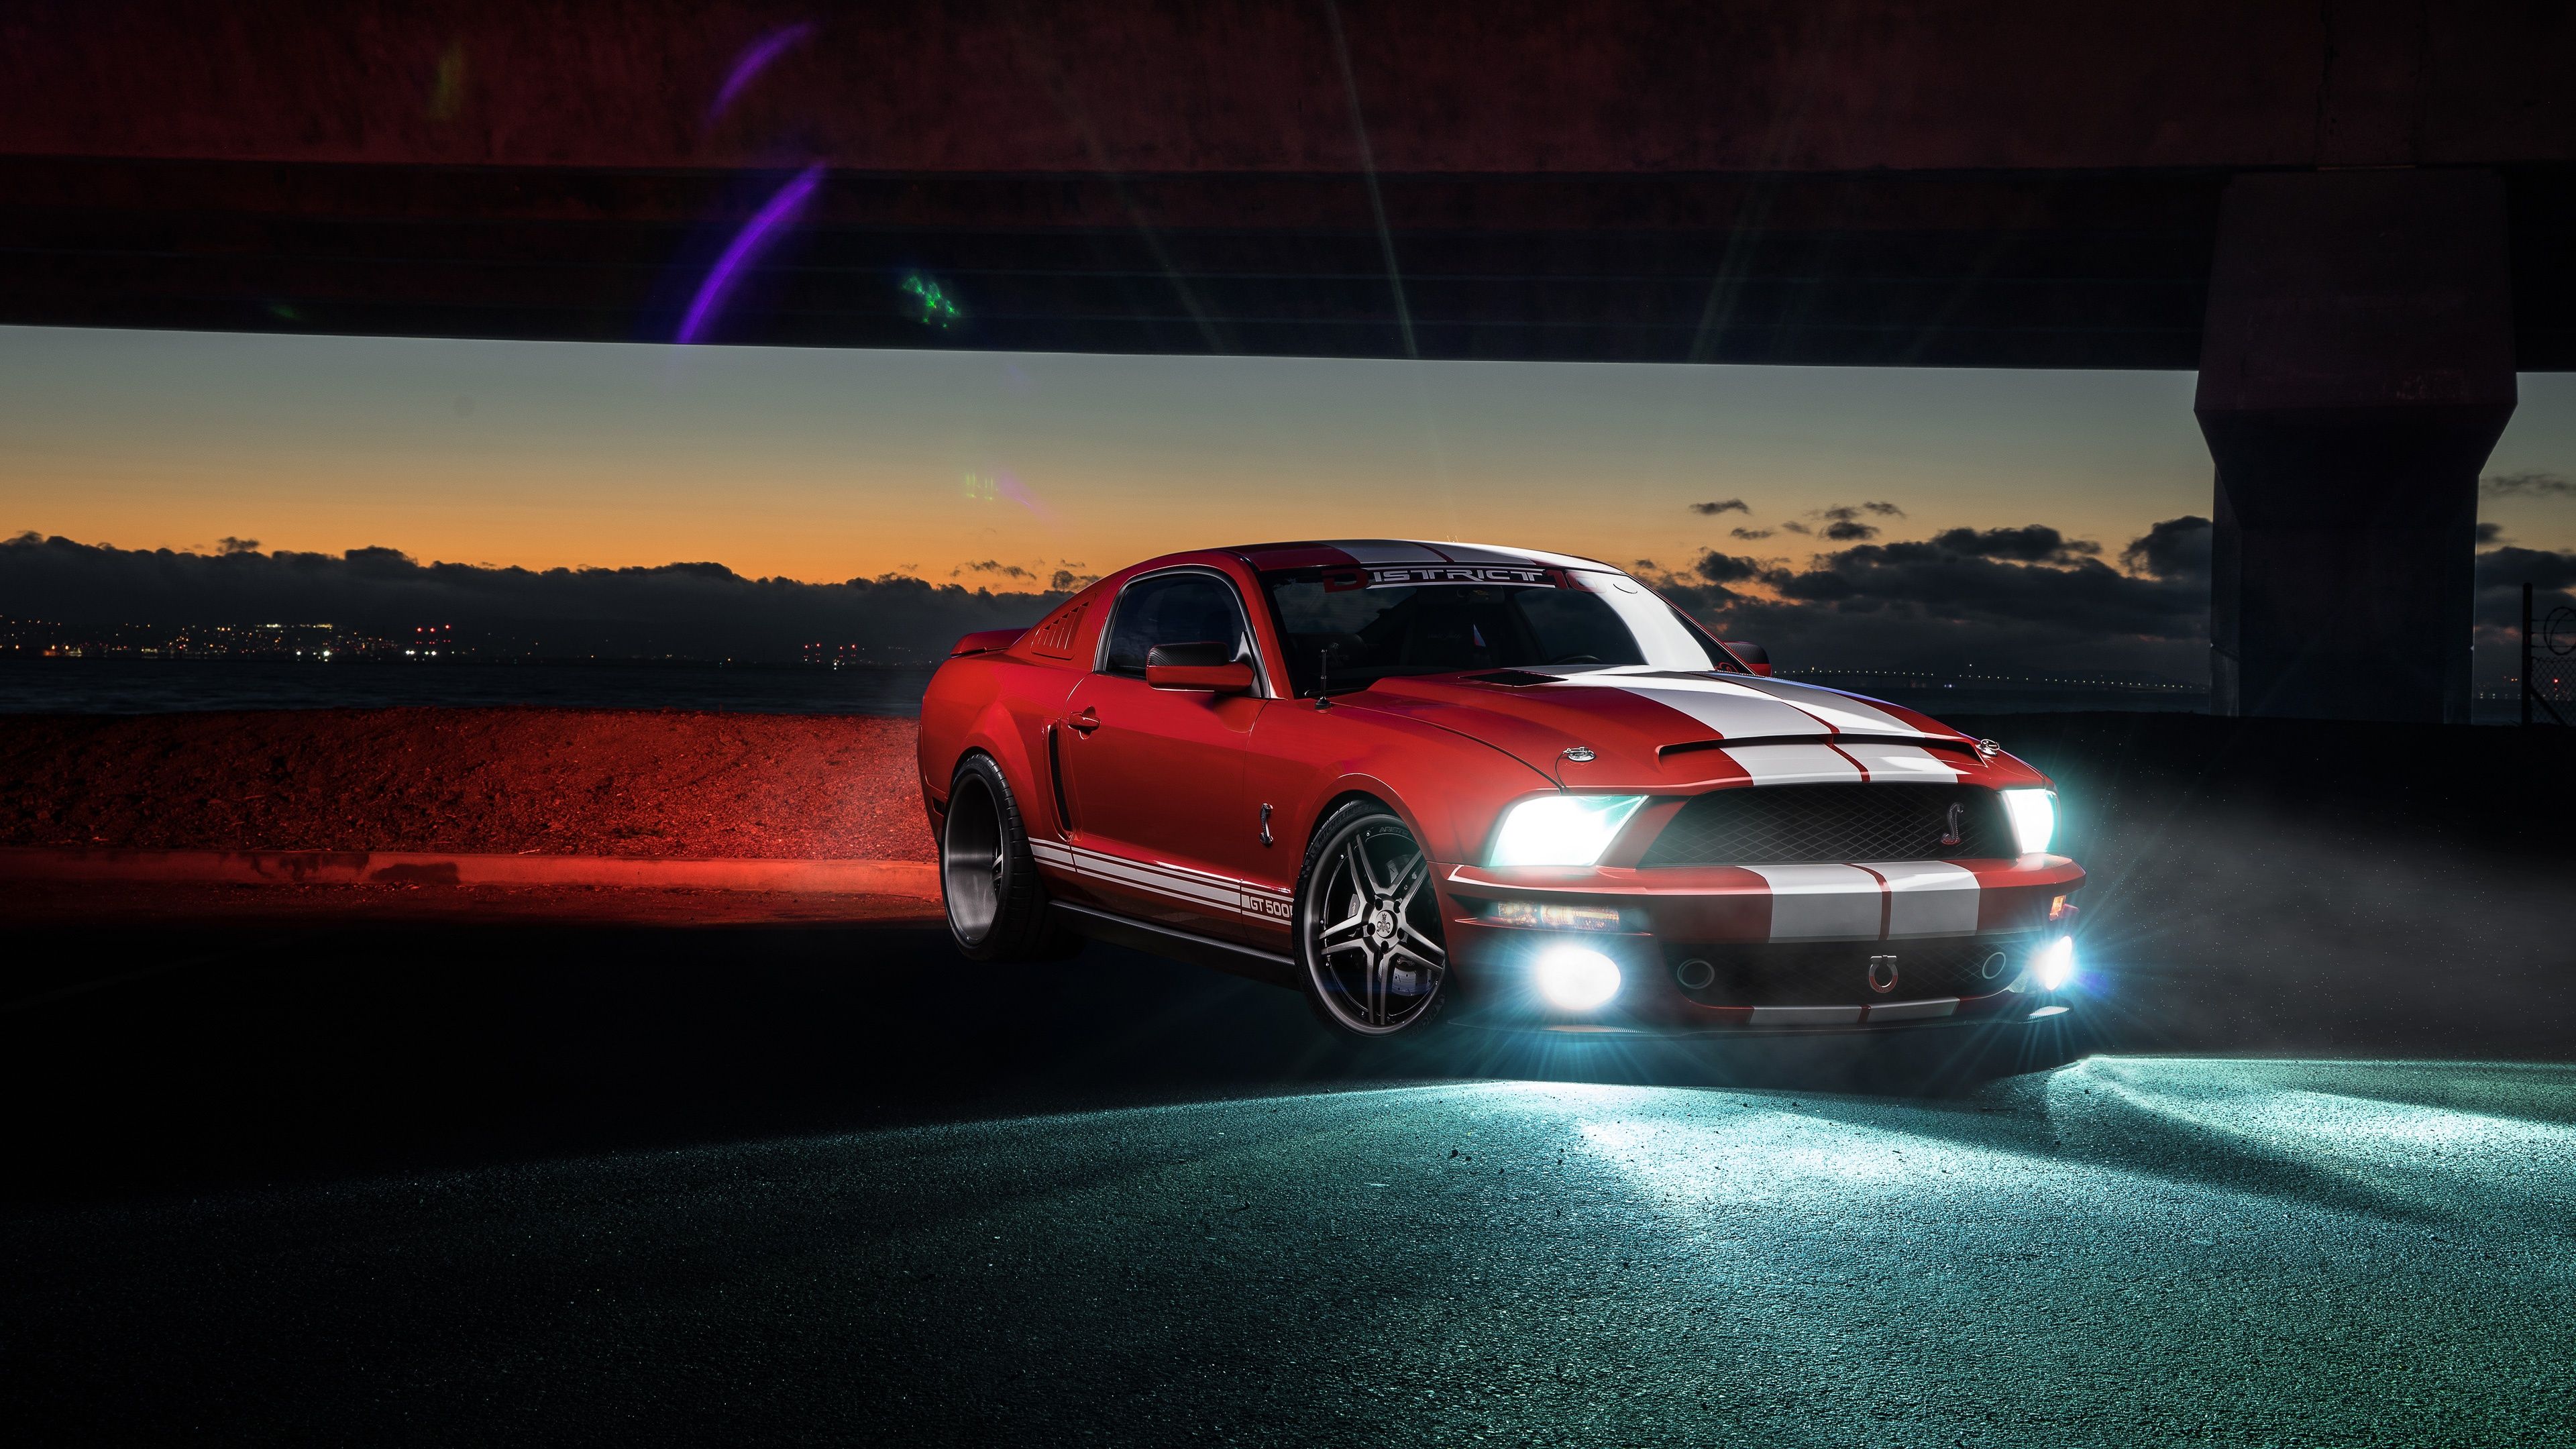 Ford Mustang Shelby GT500 4K Wallpaper in jpg format for free download